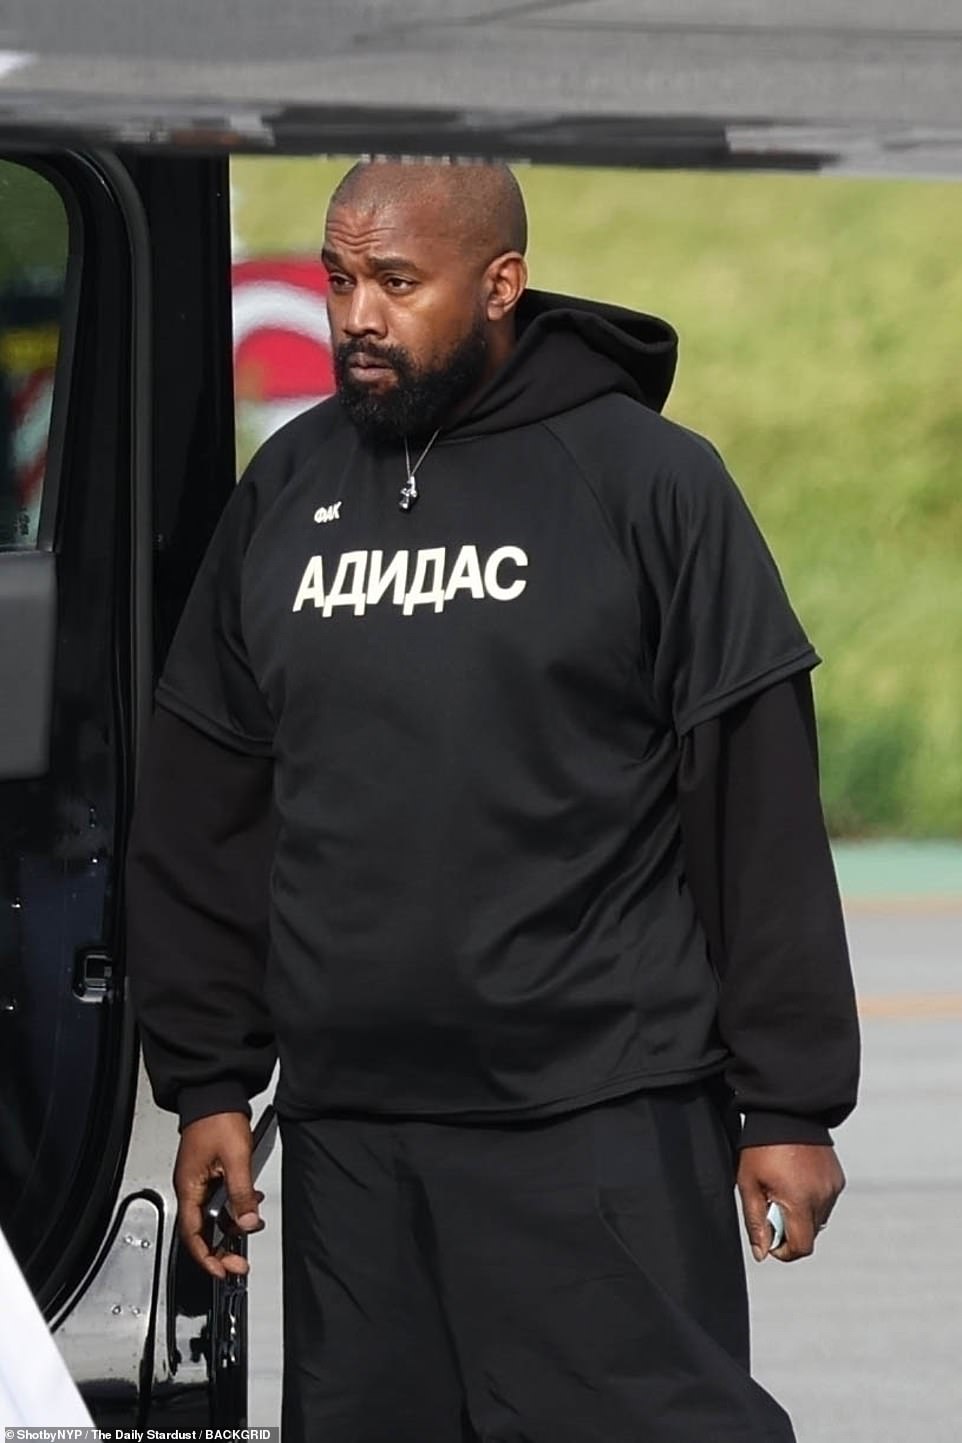 Kanye was dressed in an oversized black sweatsuit that completely covered his frame